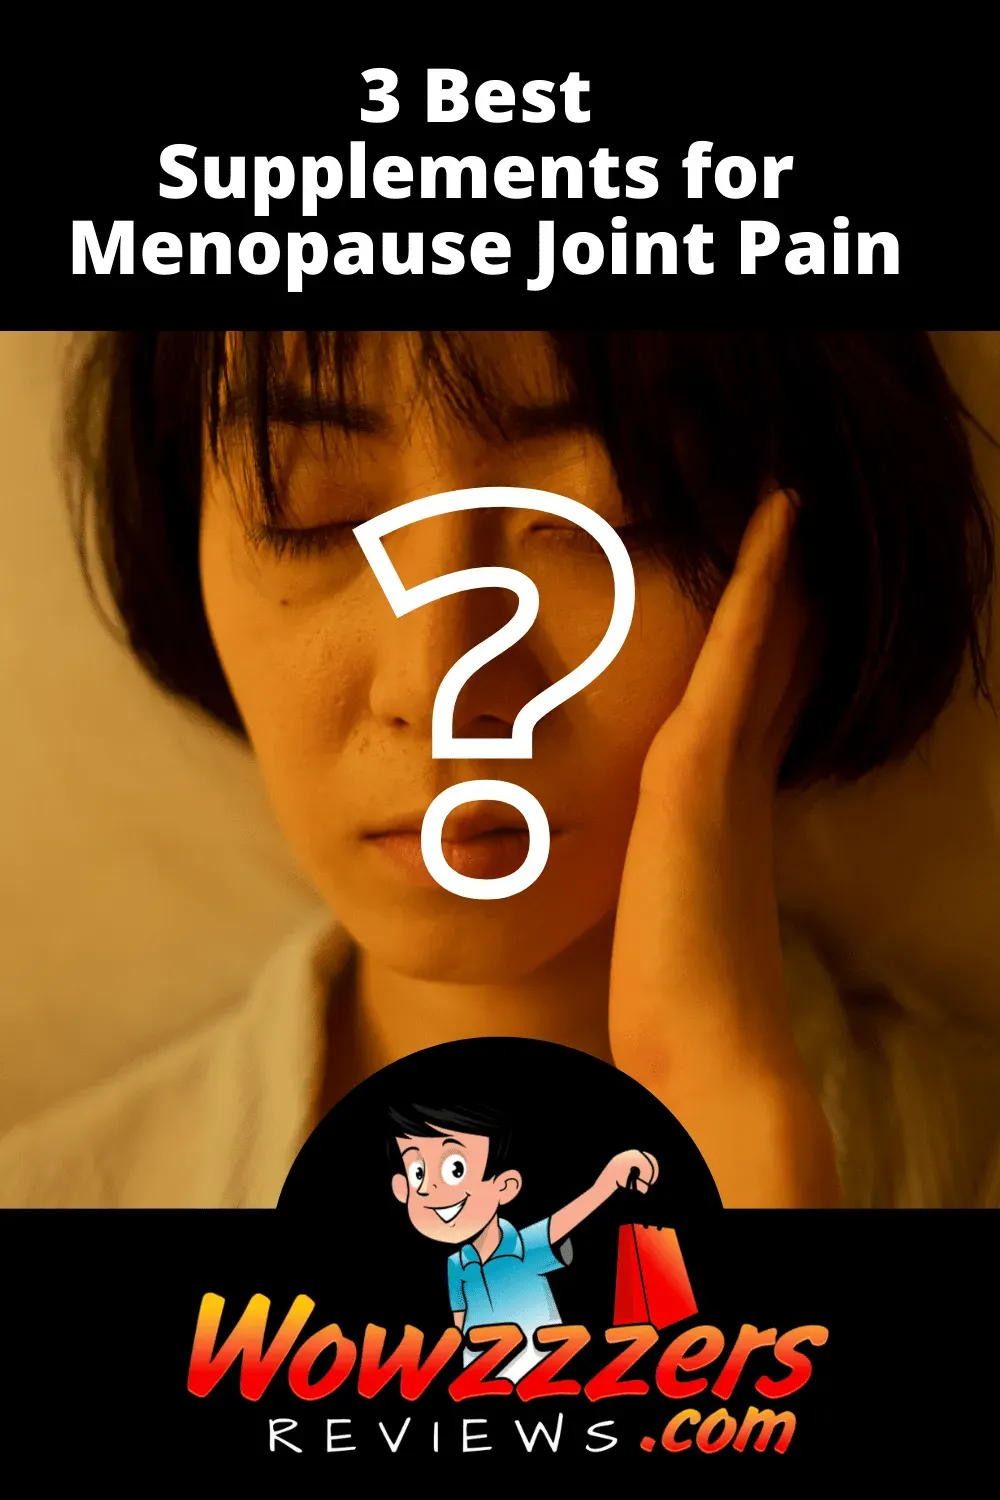 Best Supplements for Menopause Joint Pain